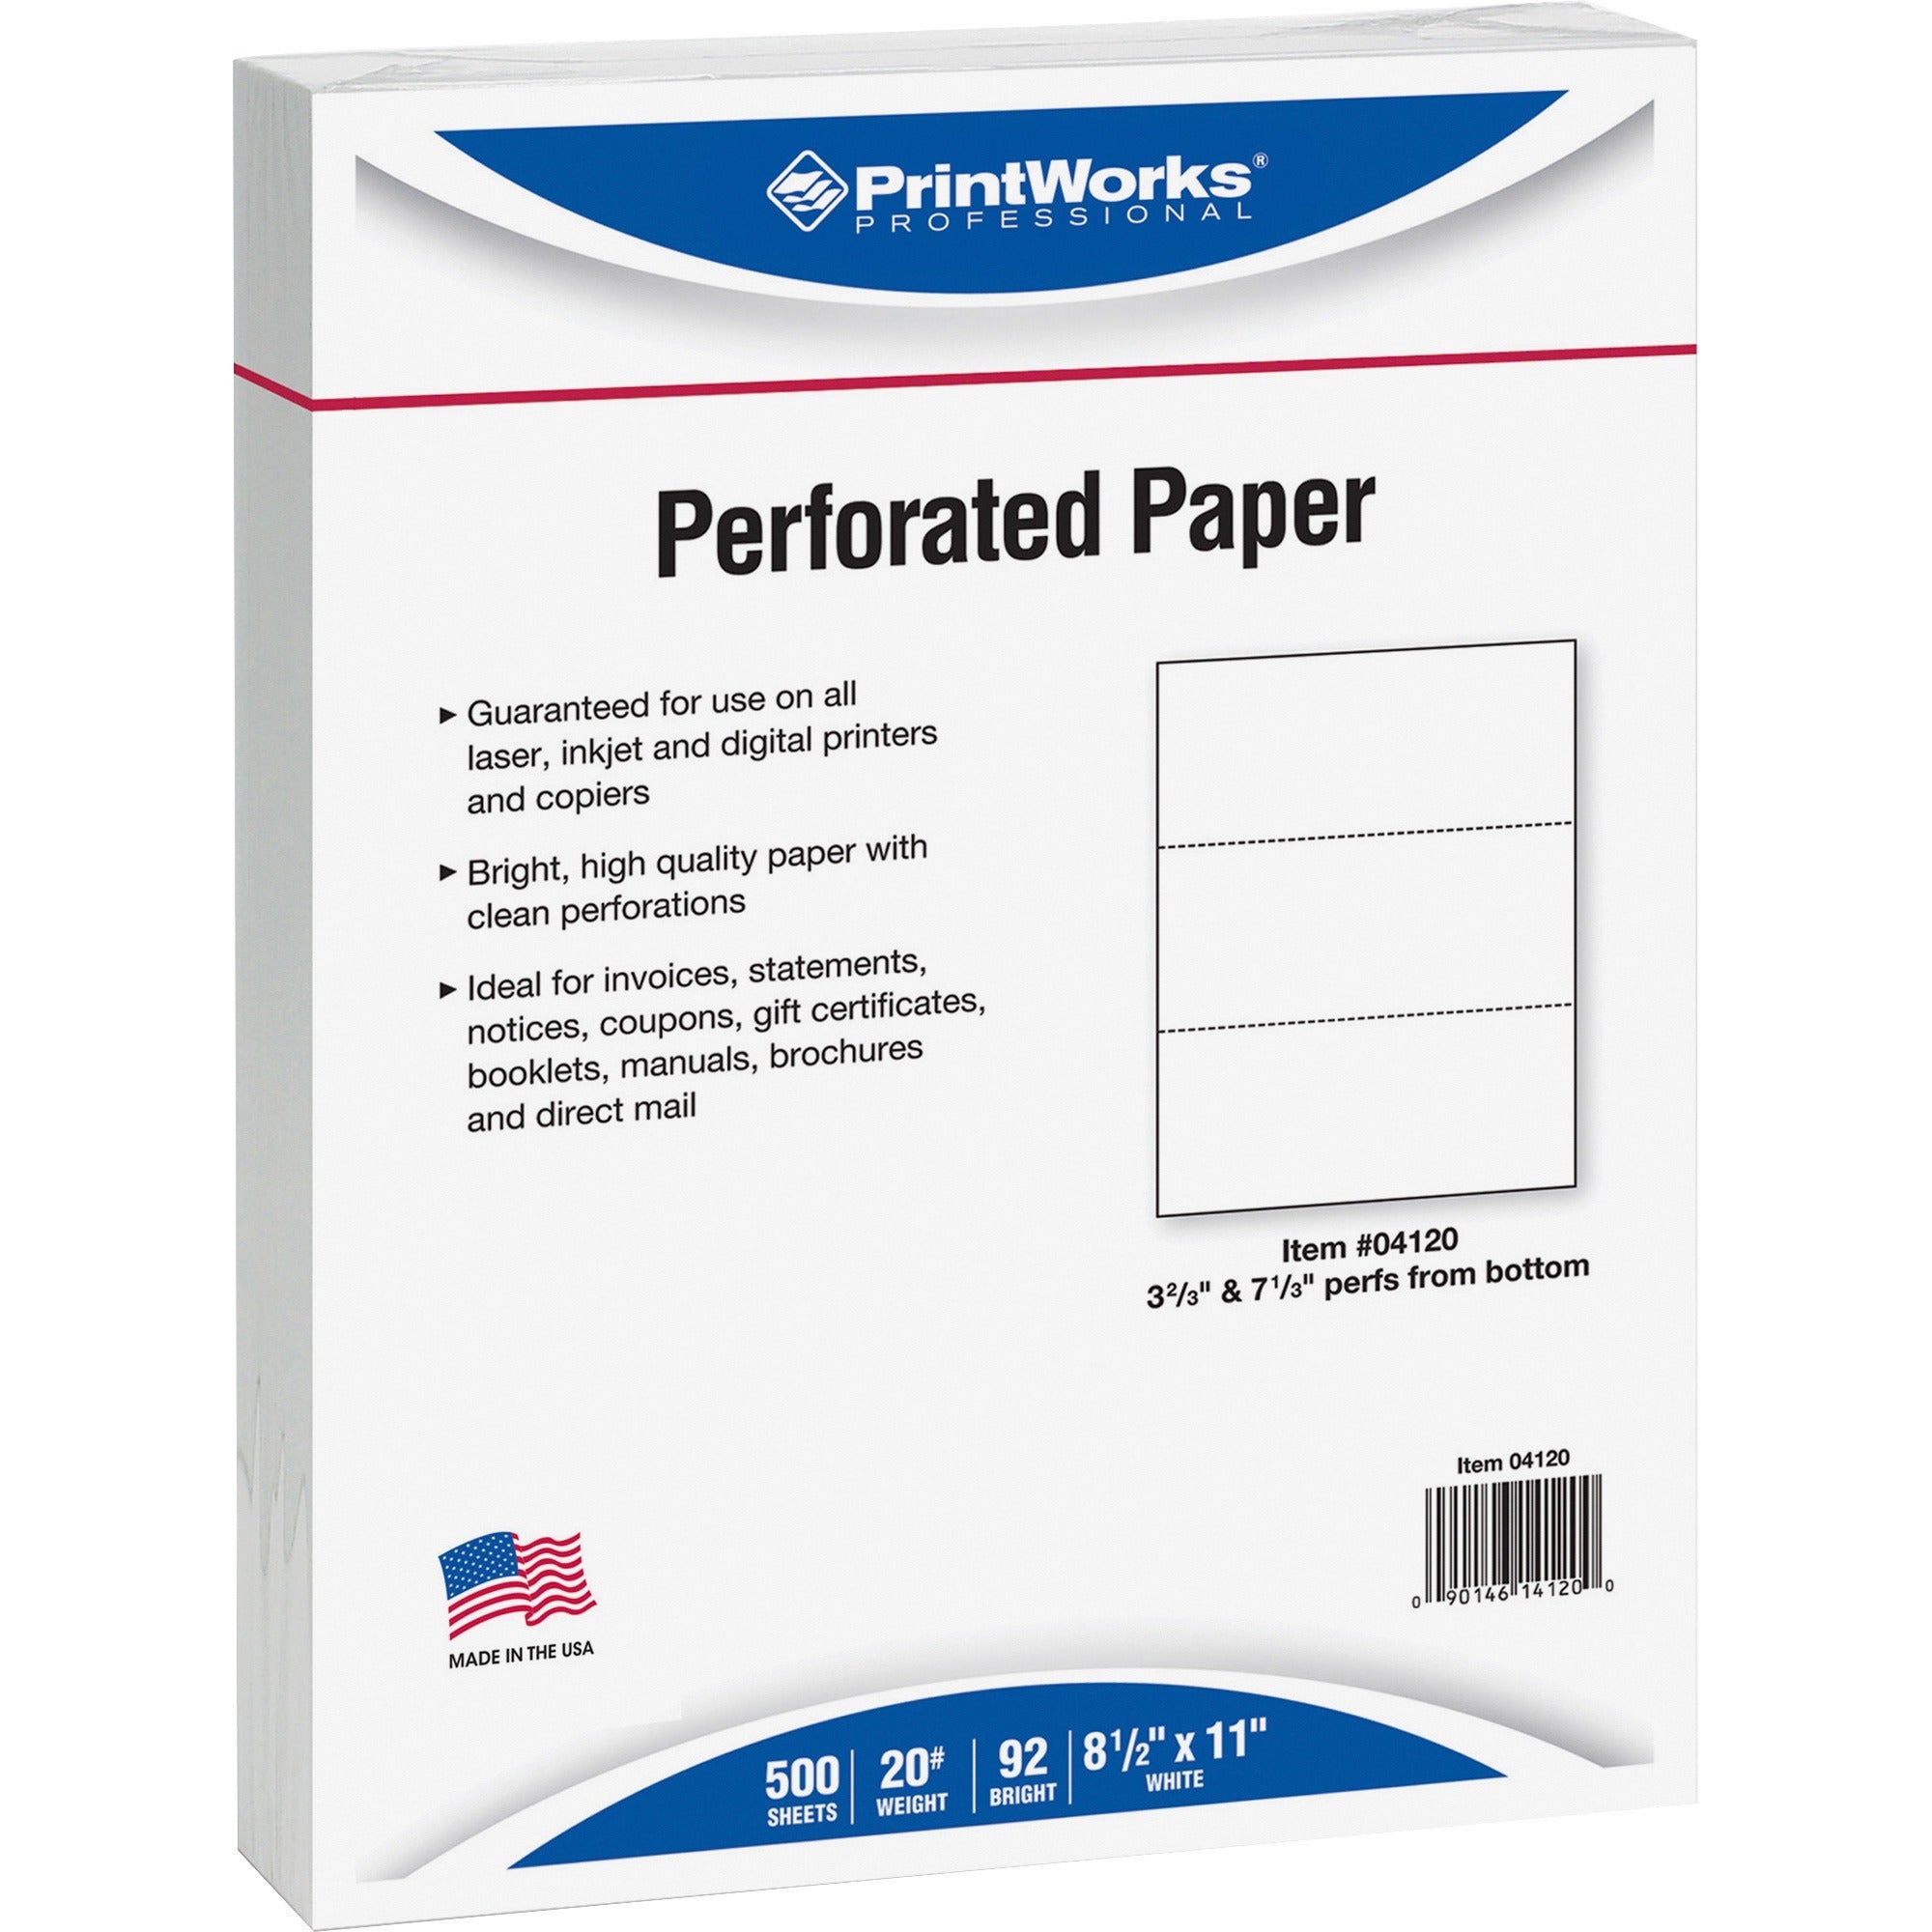 PrintWorks Professional Pre-Perforated Paper for Invoices, Statements, Gift Certificates & More - Letter - 8 1/2" x 11" - 20 lb Basis Weight - 500 / Ream - Sustainable Forestry Initiative (SFI) - Perforated - White - 